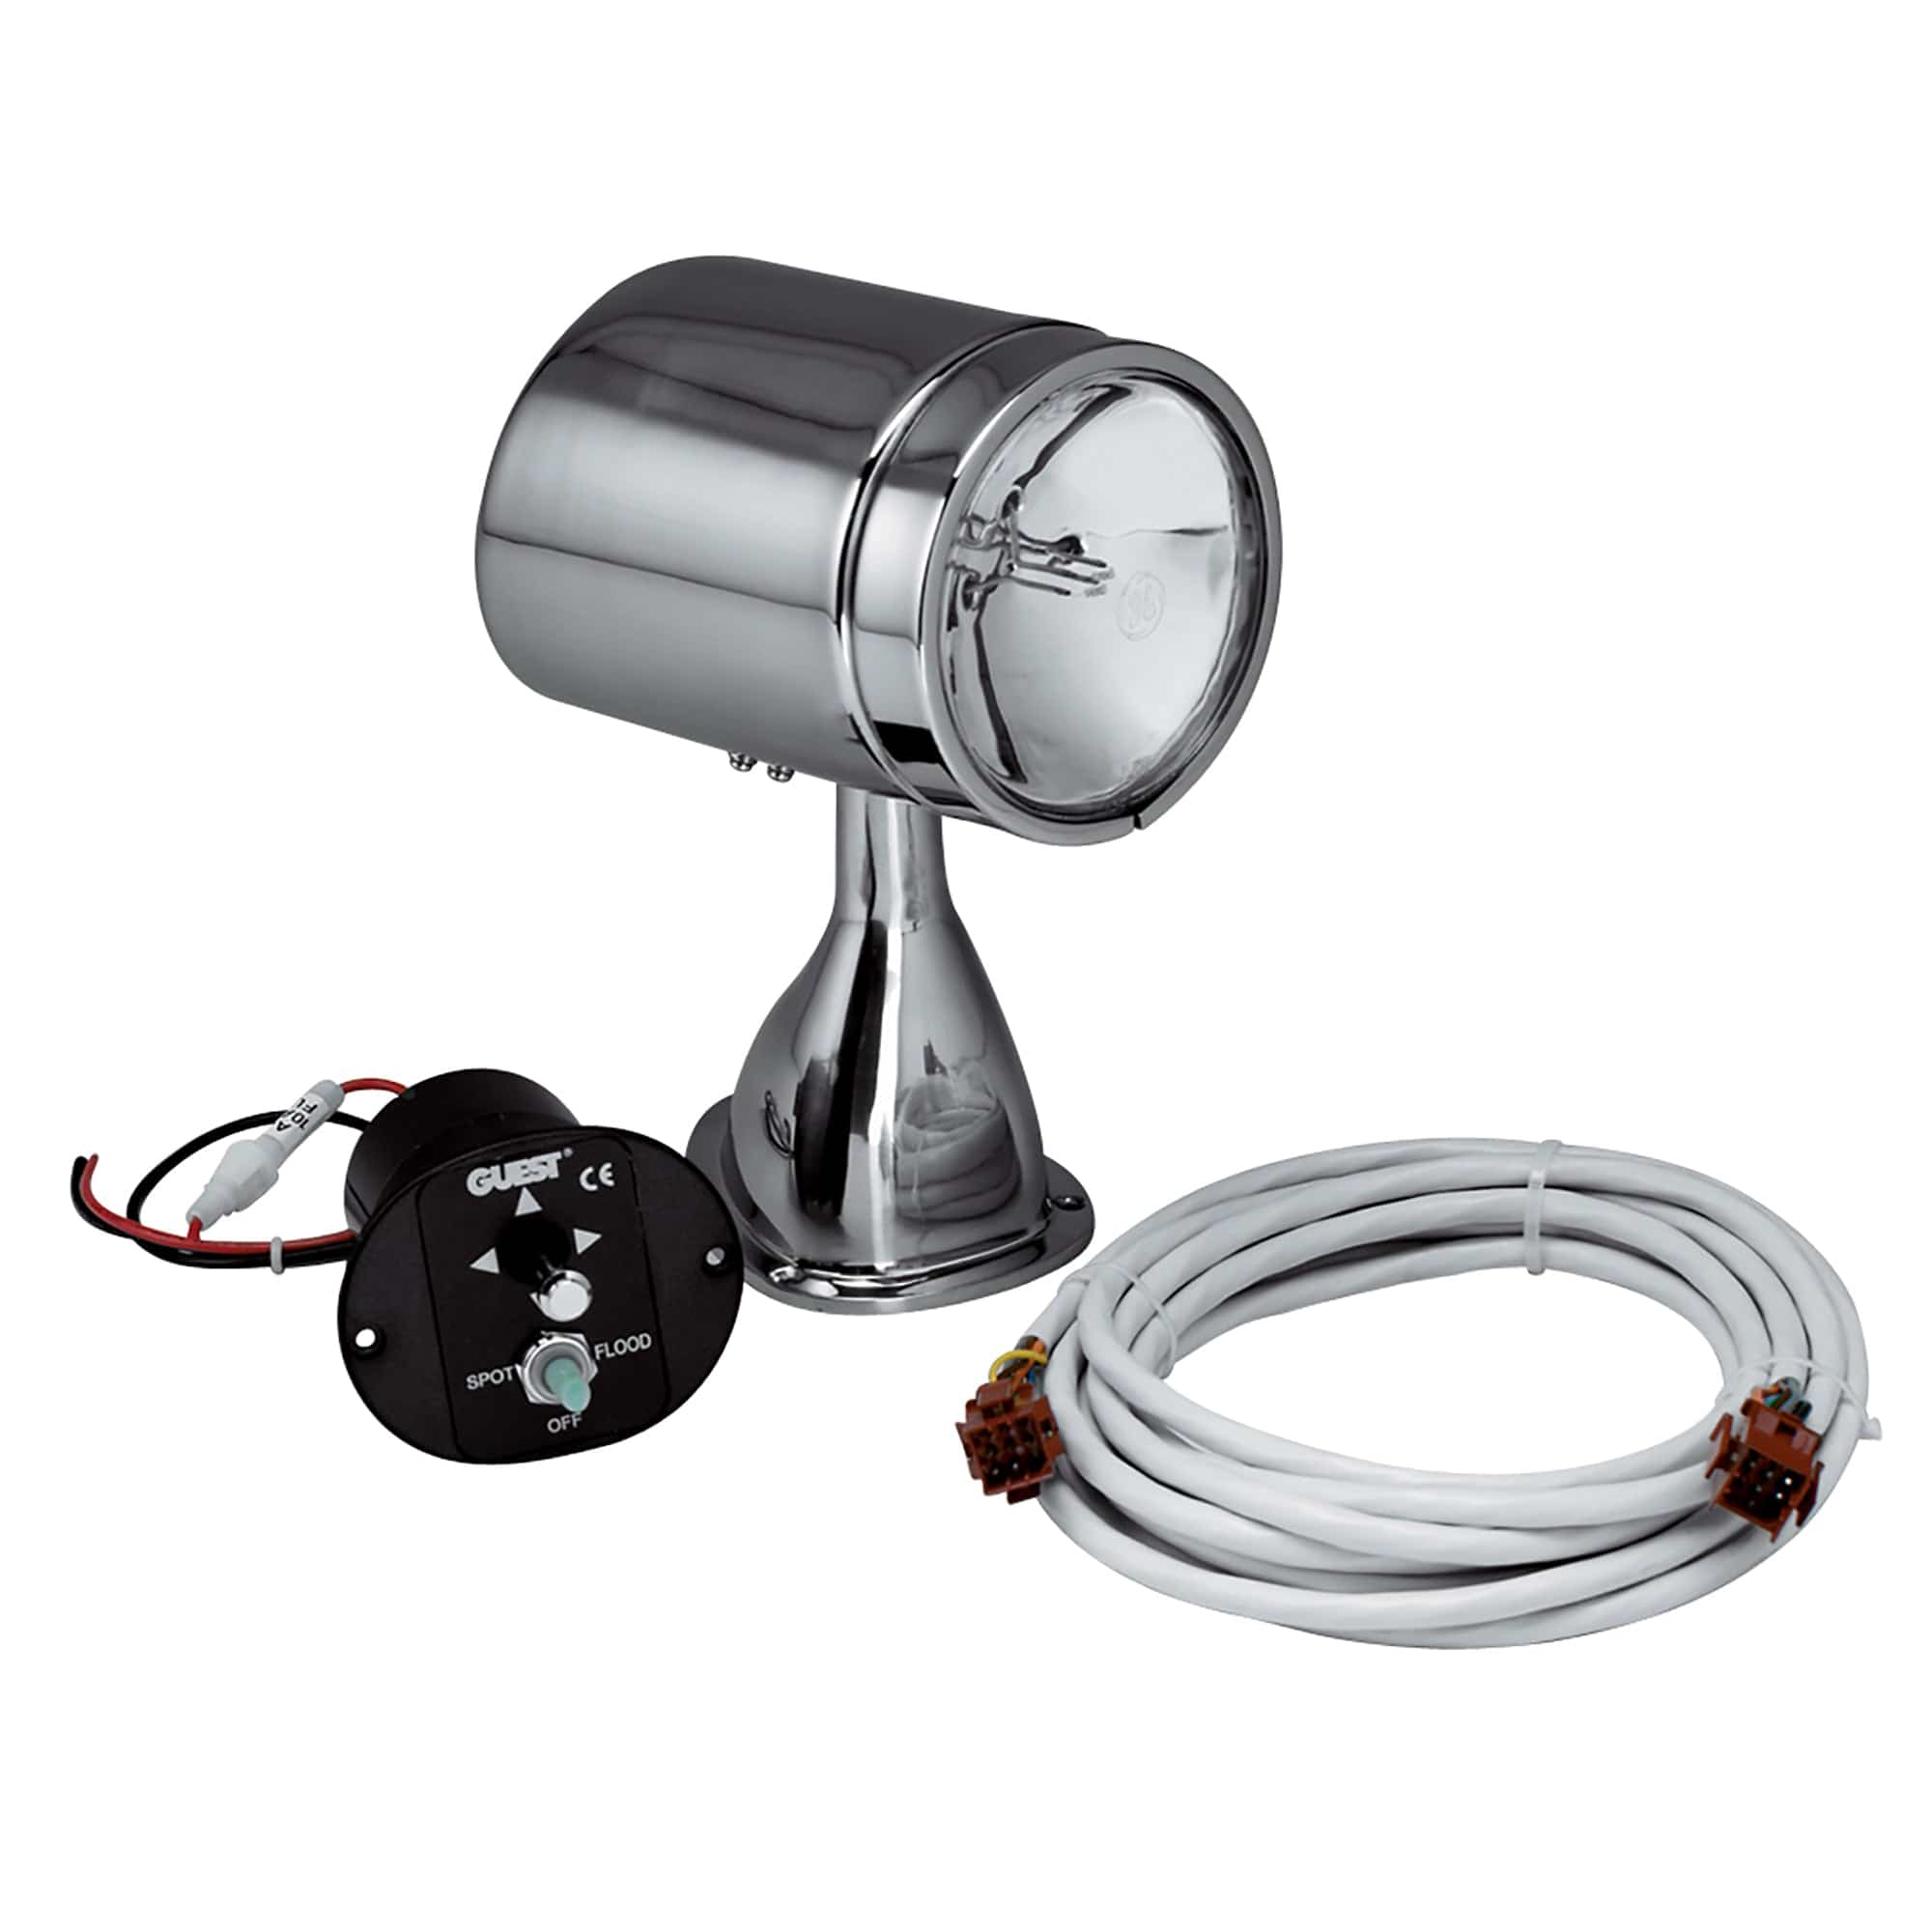 Guest 5" Stainless Steel Spot/Flood Light with 15' Harness and Control